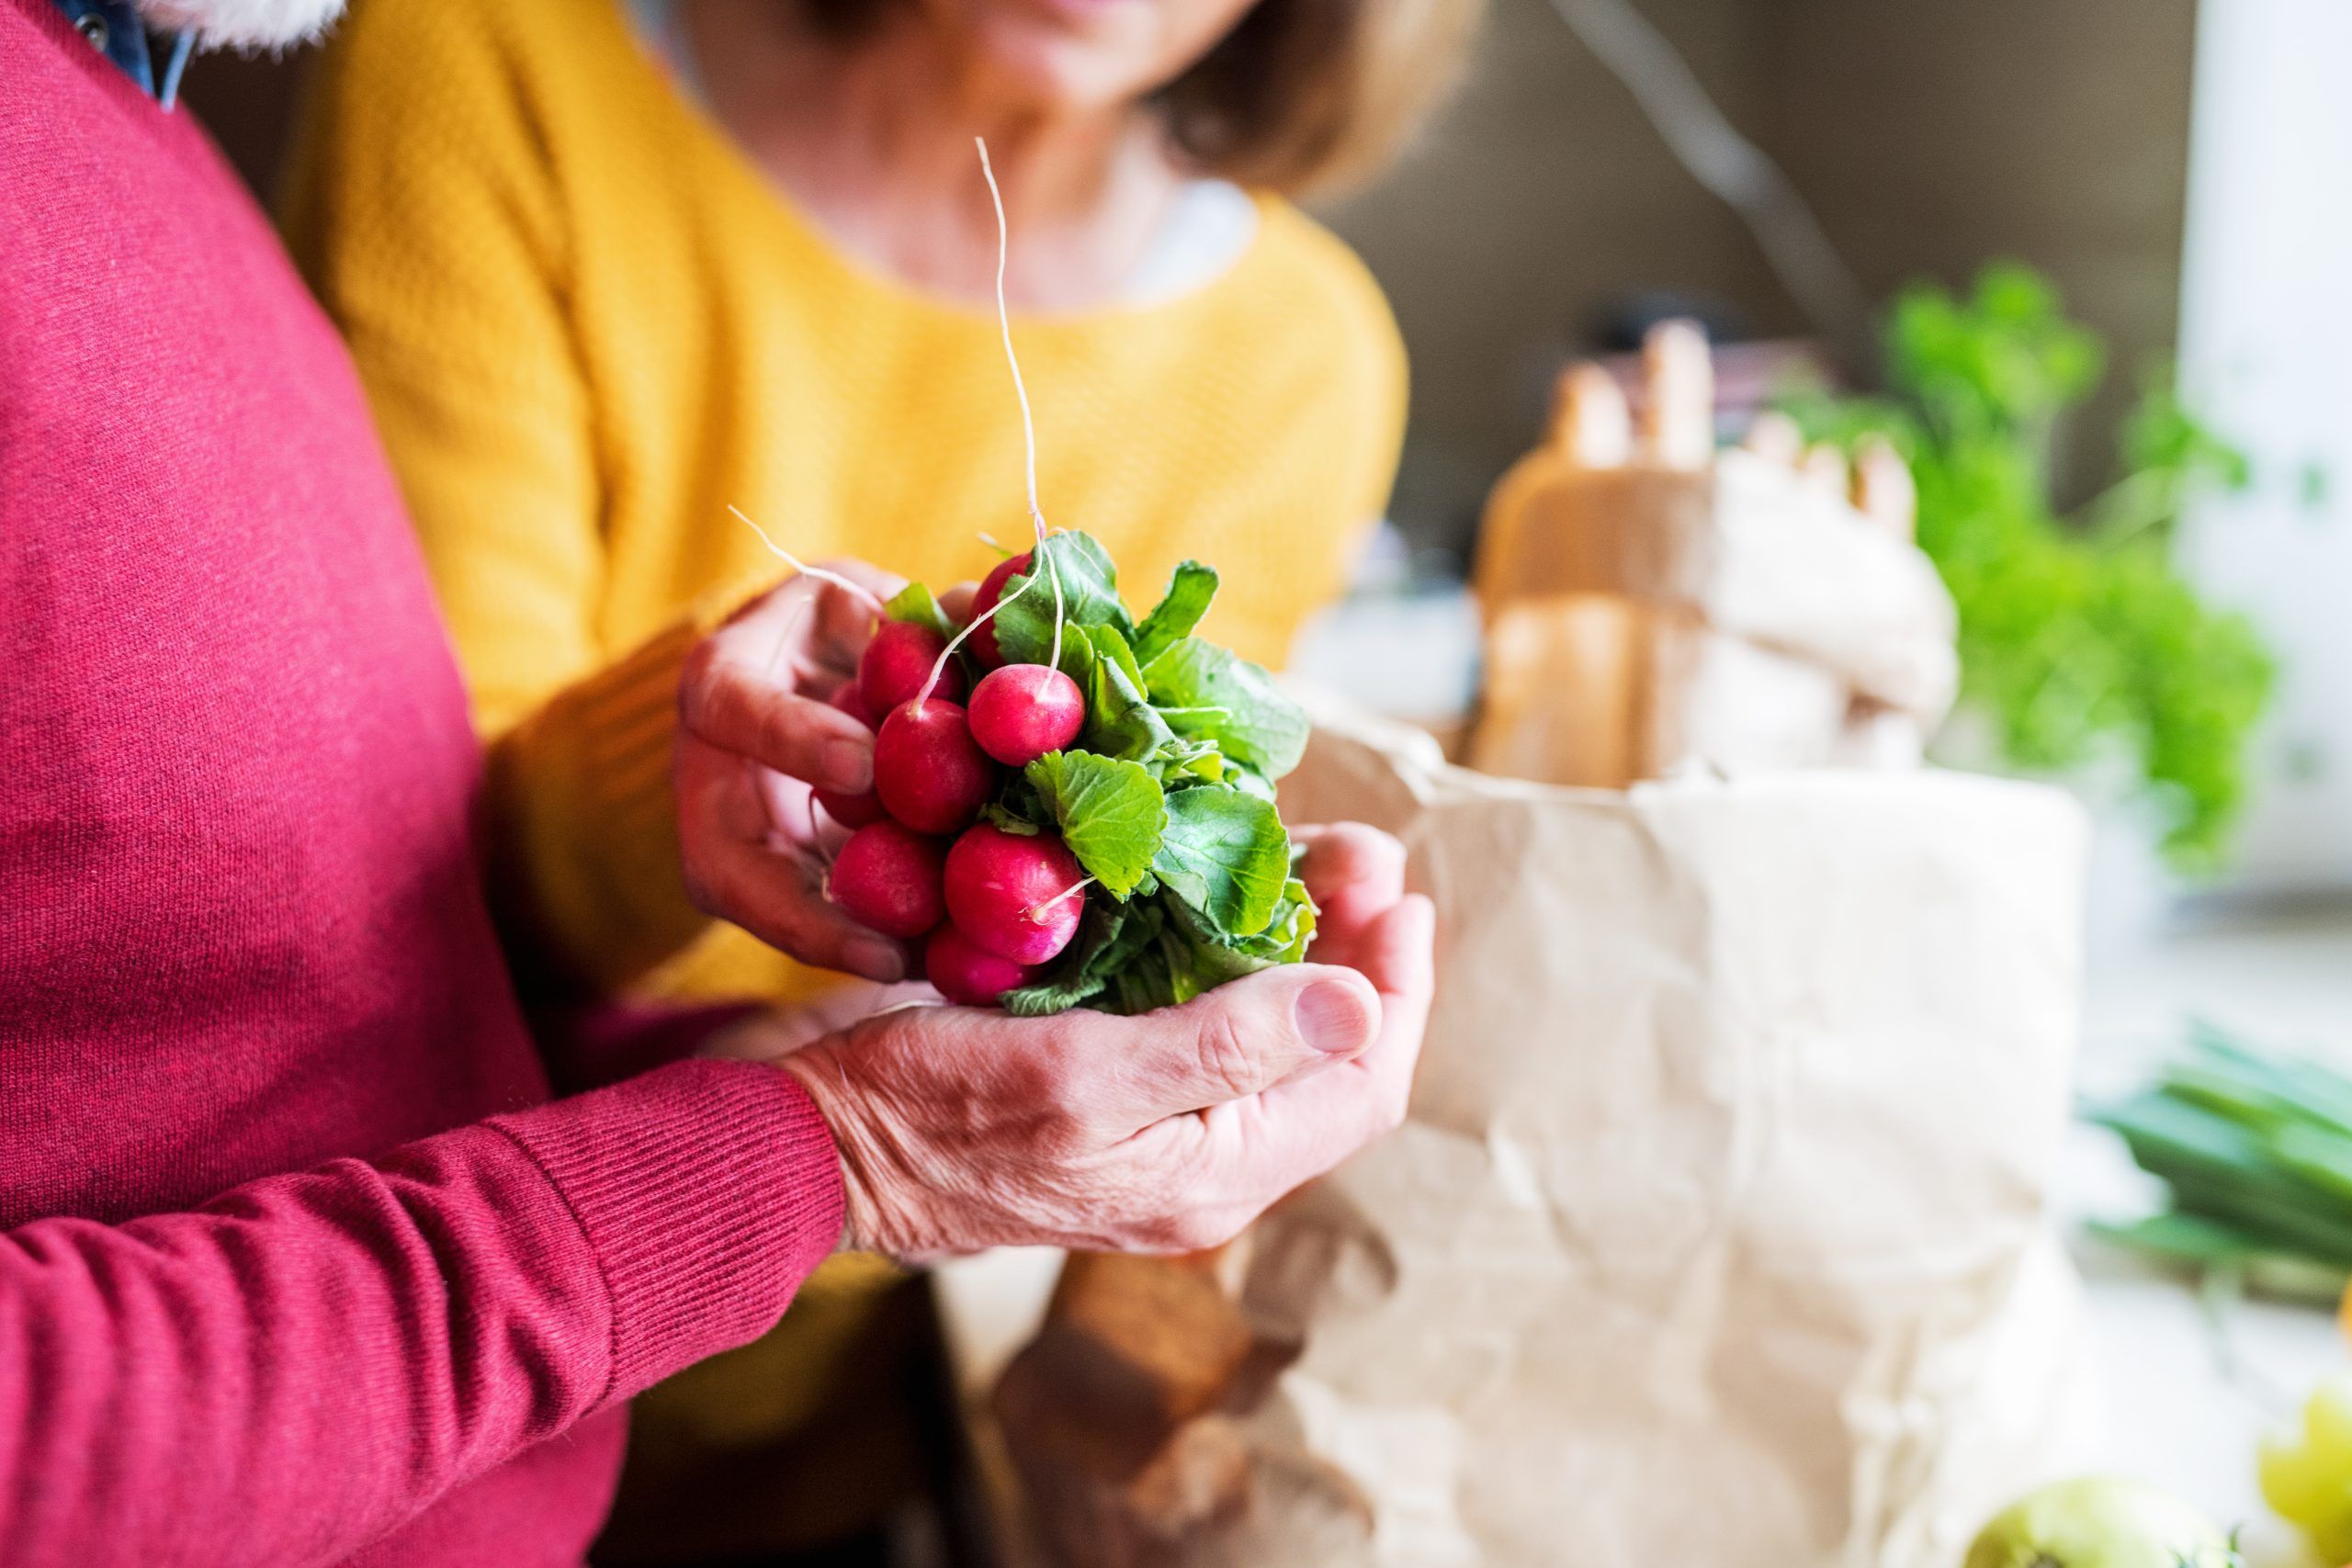 Seniors may need help maintaining good nutrition. Stock/Getty